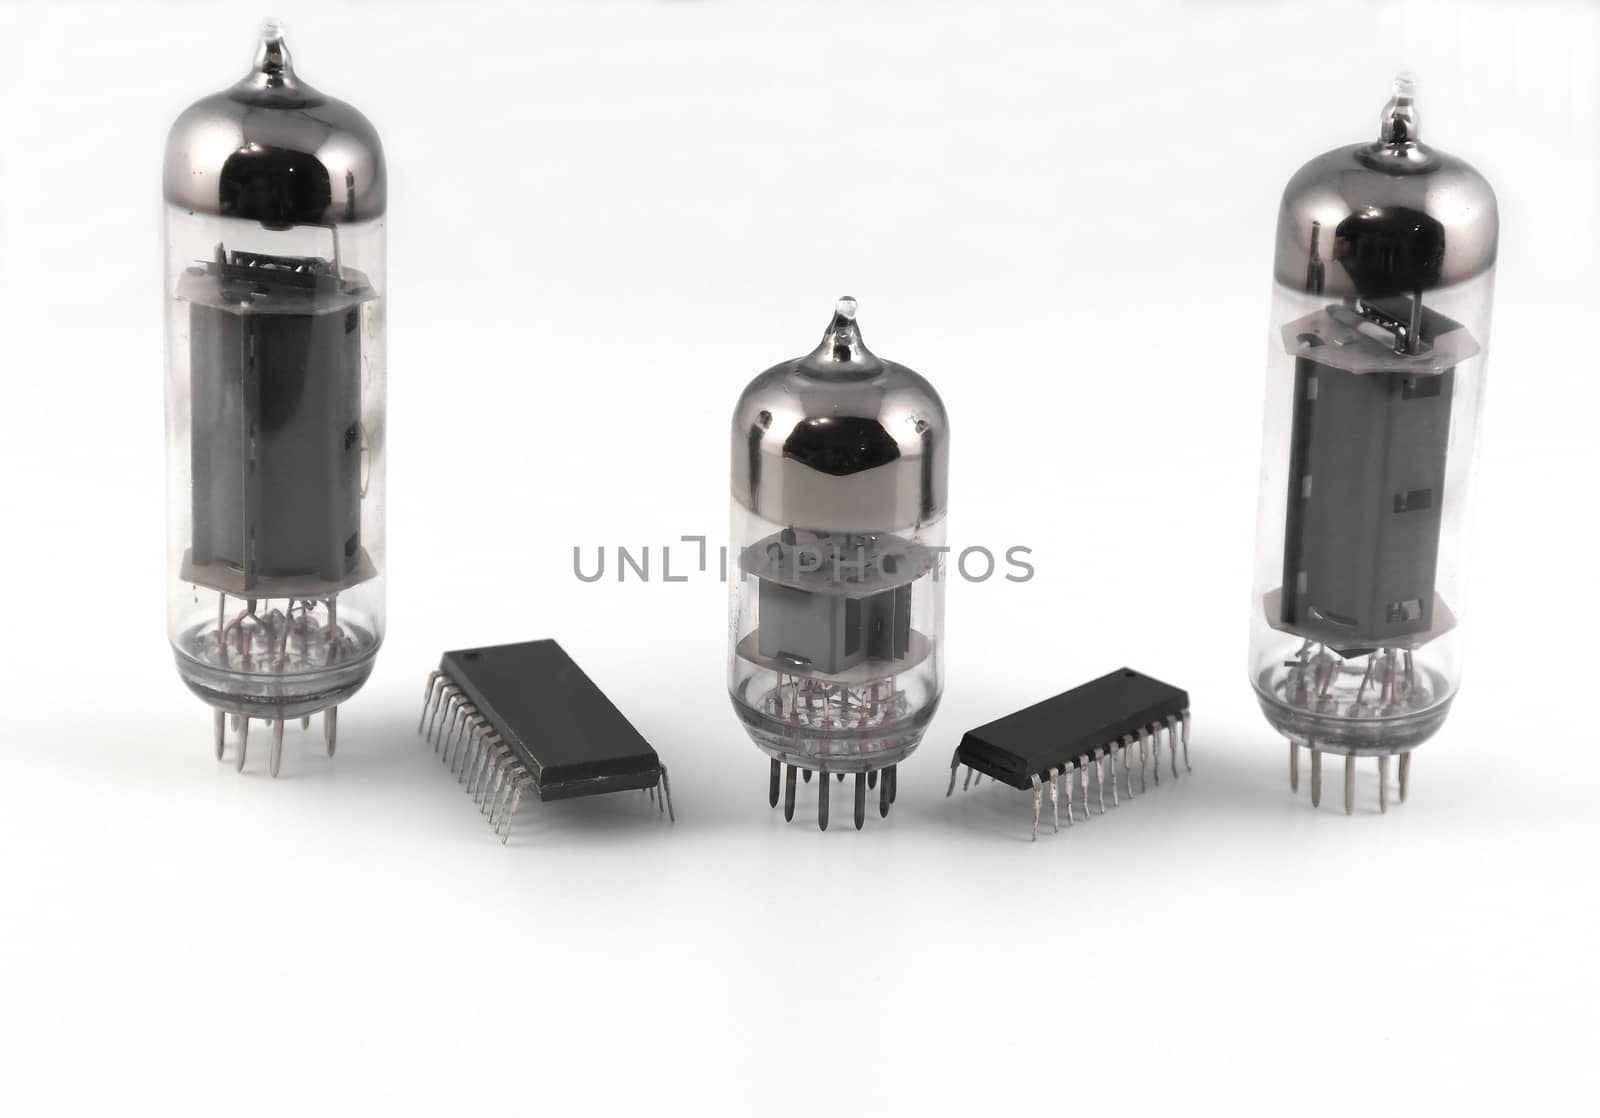 Vacuum radio tubes and microchips by sergpet